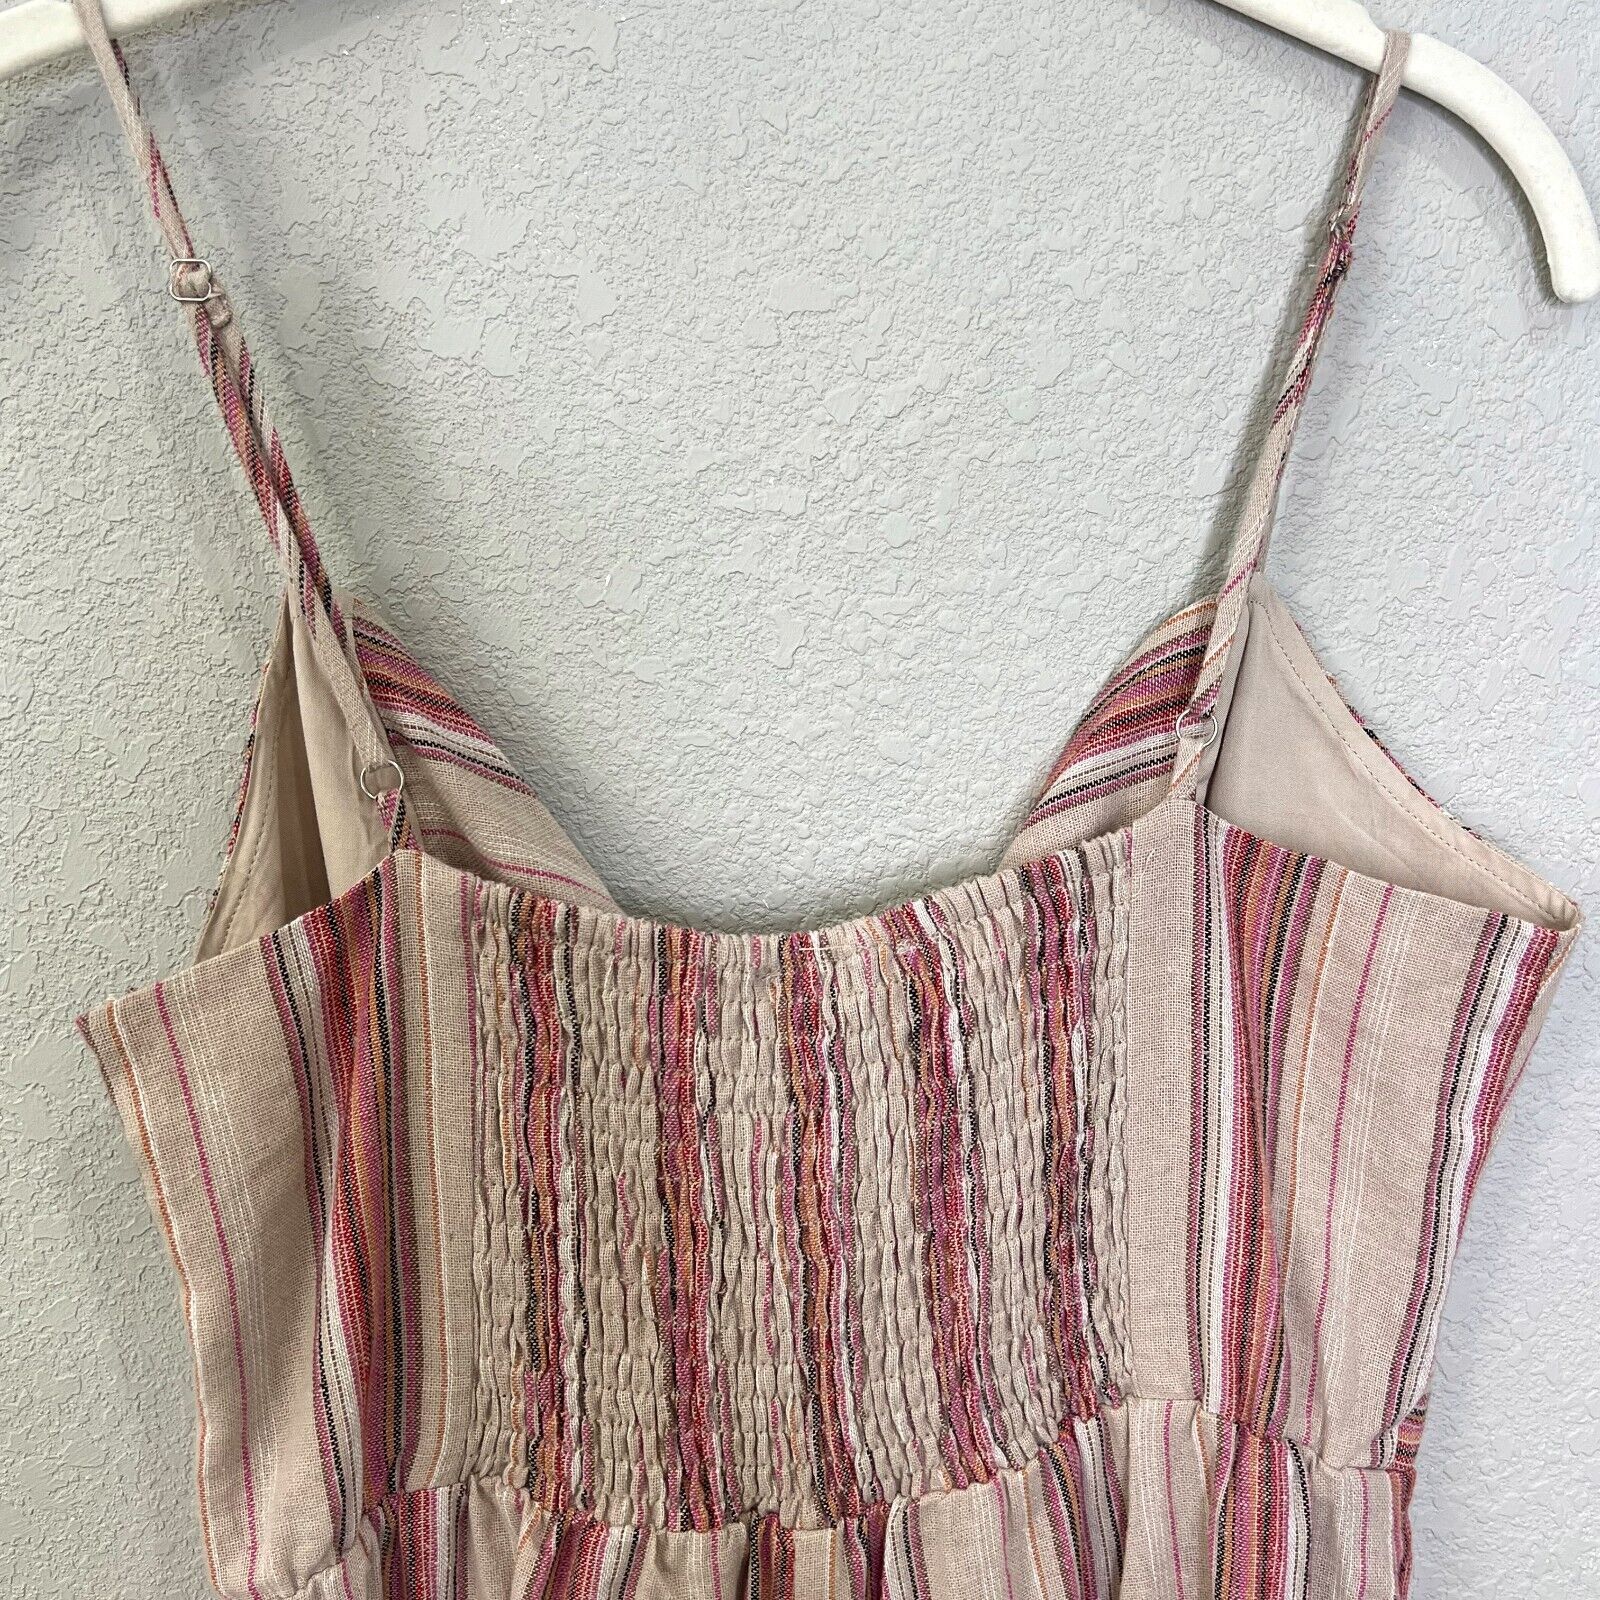 J.O.A. Los Angeles Striped Linen Tie Front Jumpsuit Size Small